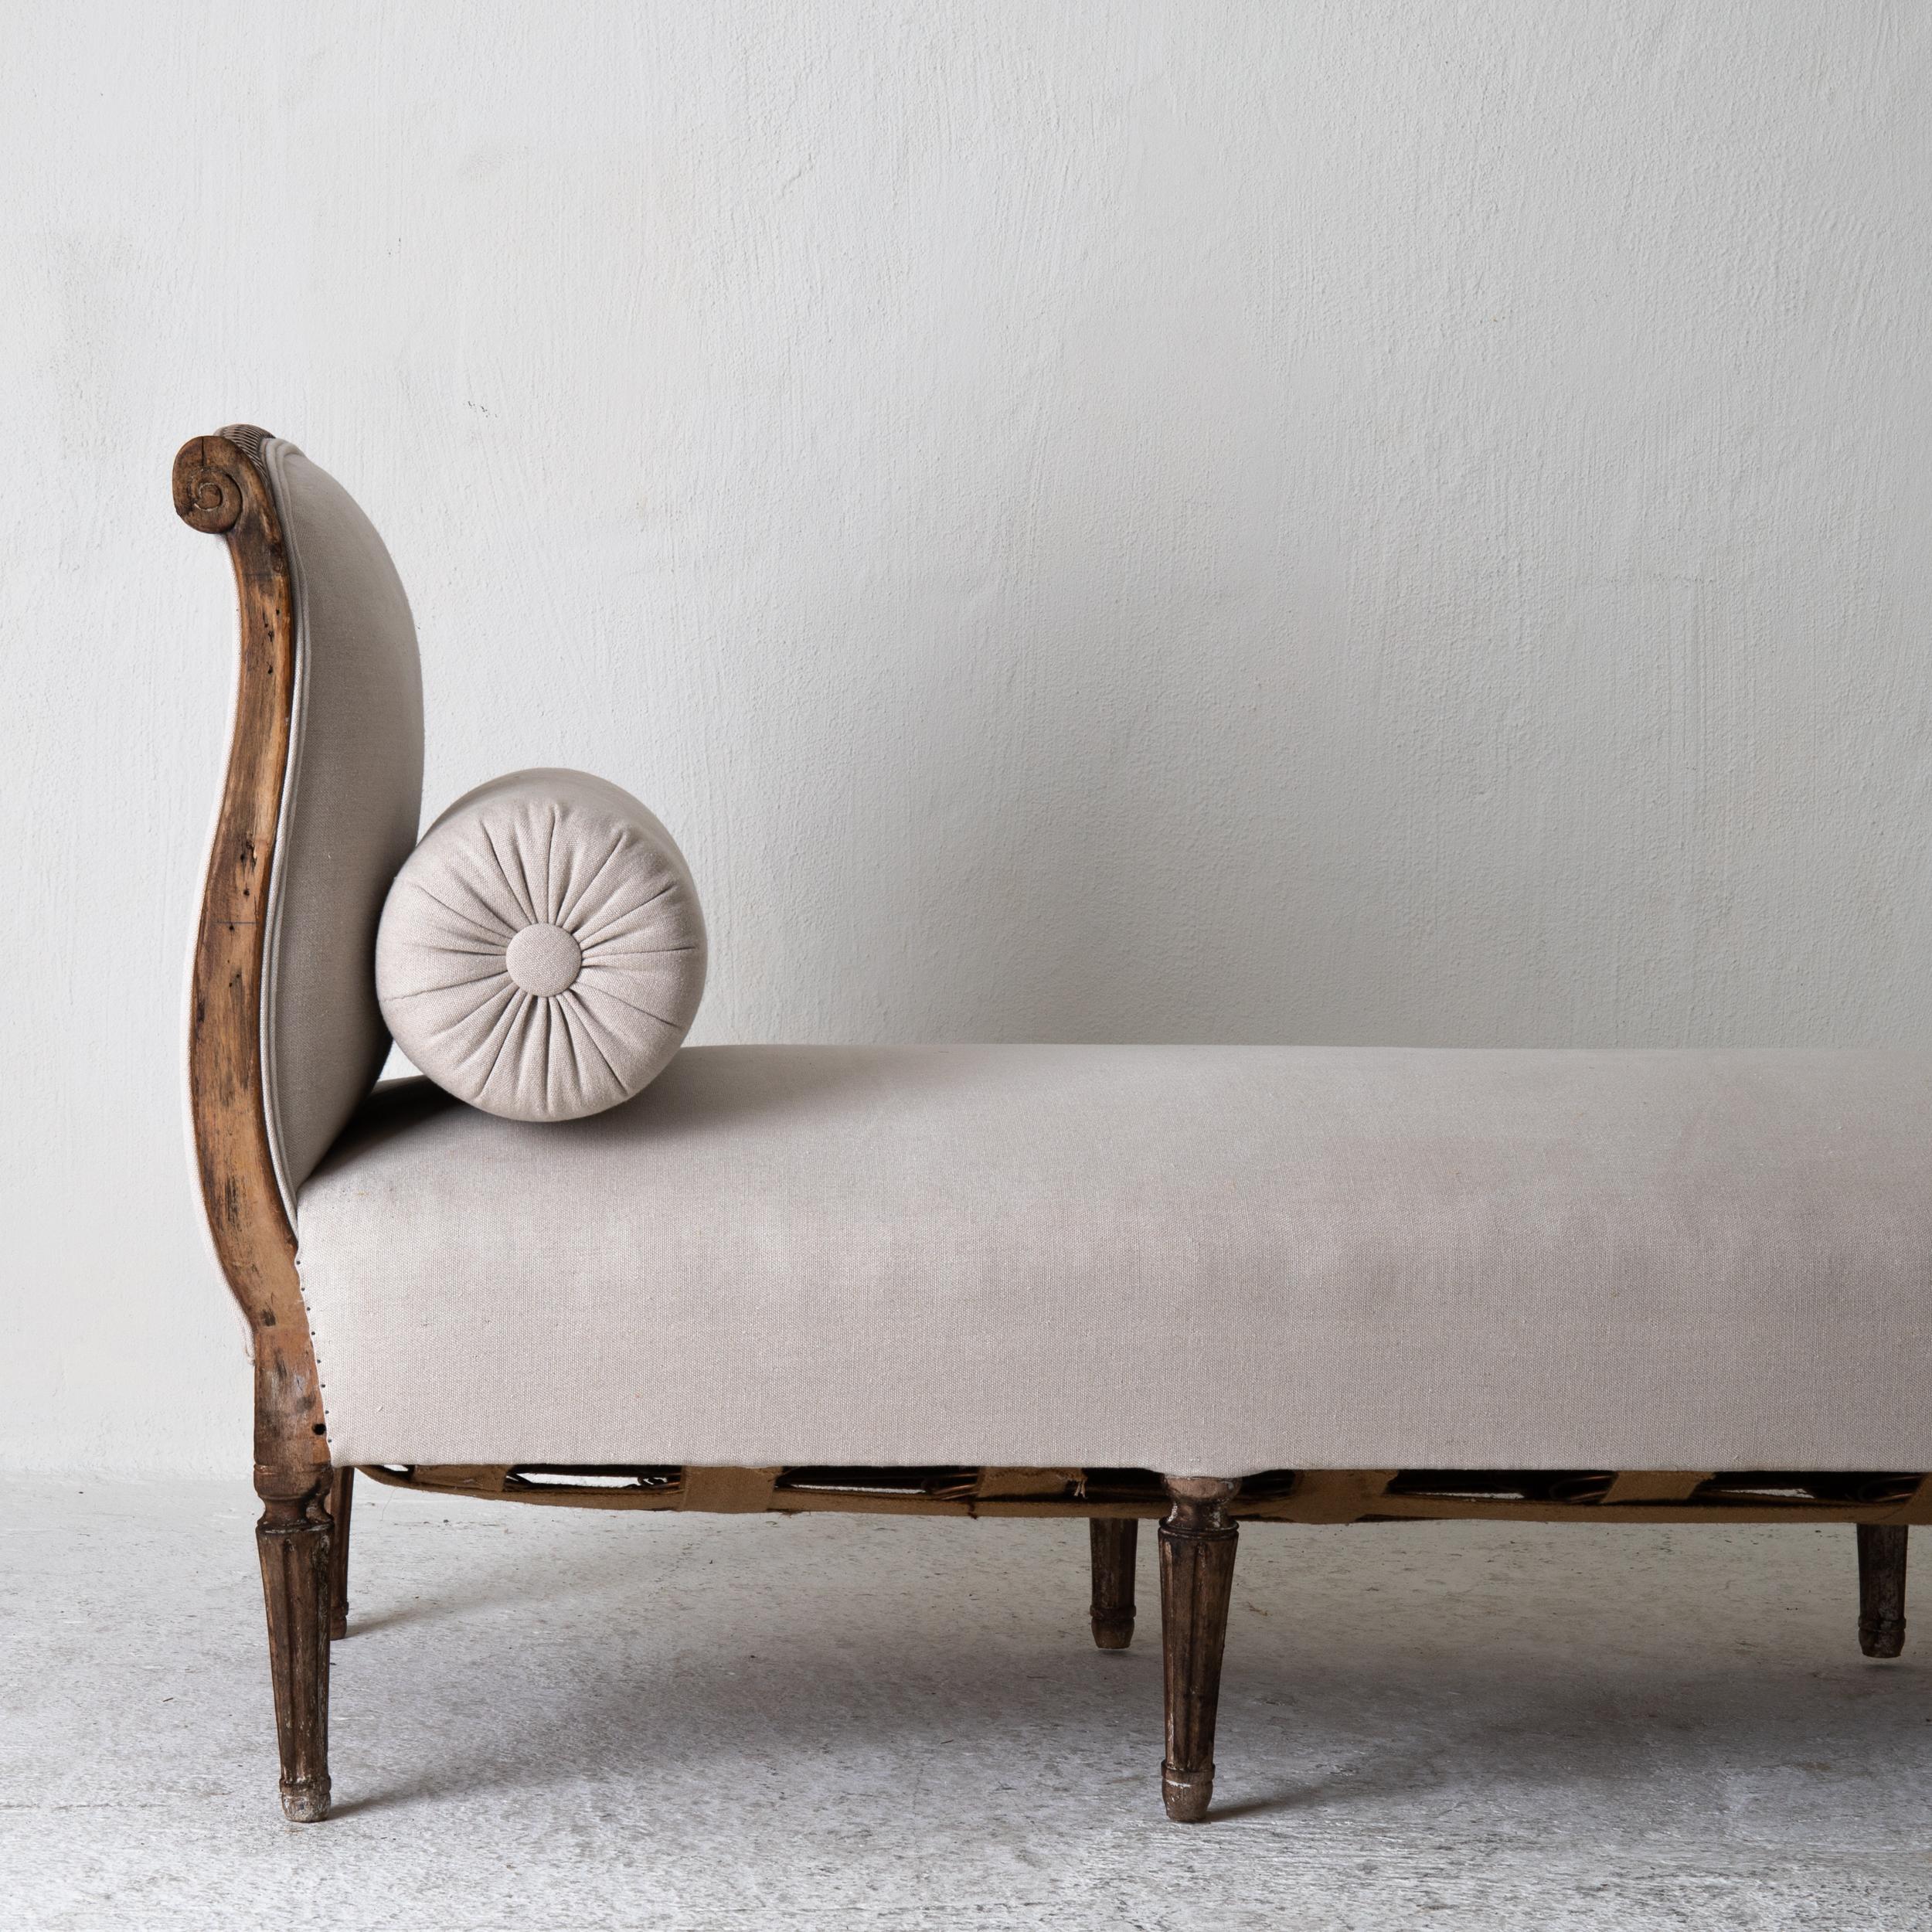 A daybed made during the early part of the Gustavian period in Sweden, 1780-1800. Frame made from dark stained wood carved with ribbon beading and flowers. Rounded and channeled legs. Upholstered in a neutral colored linen.

  